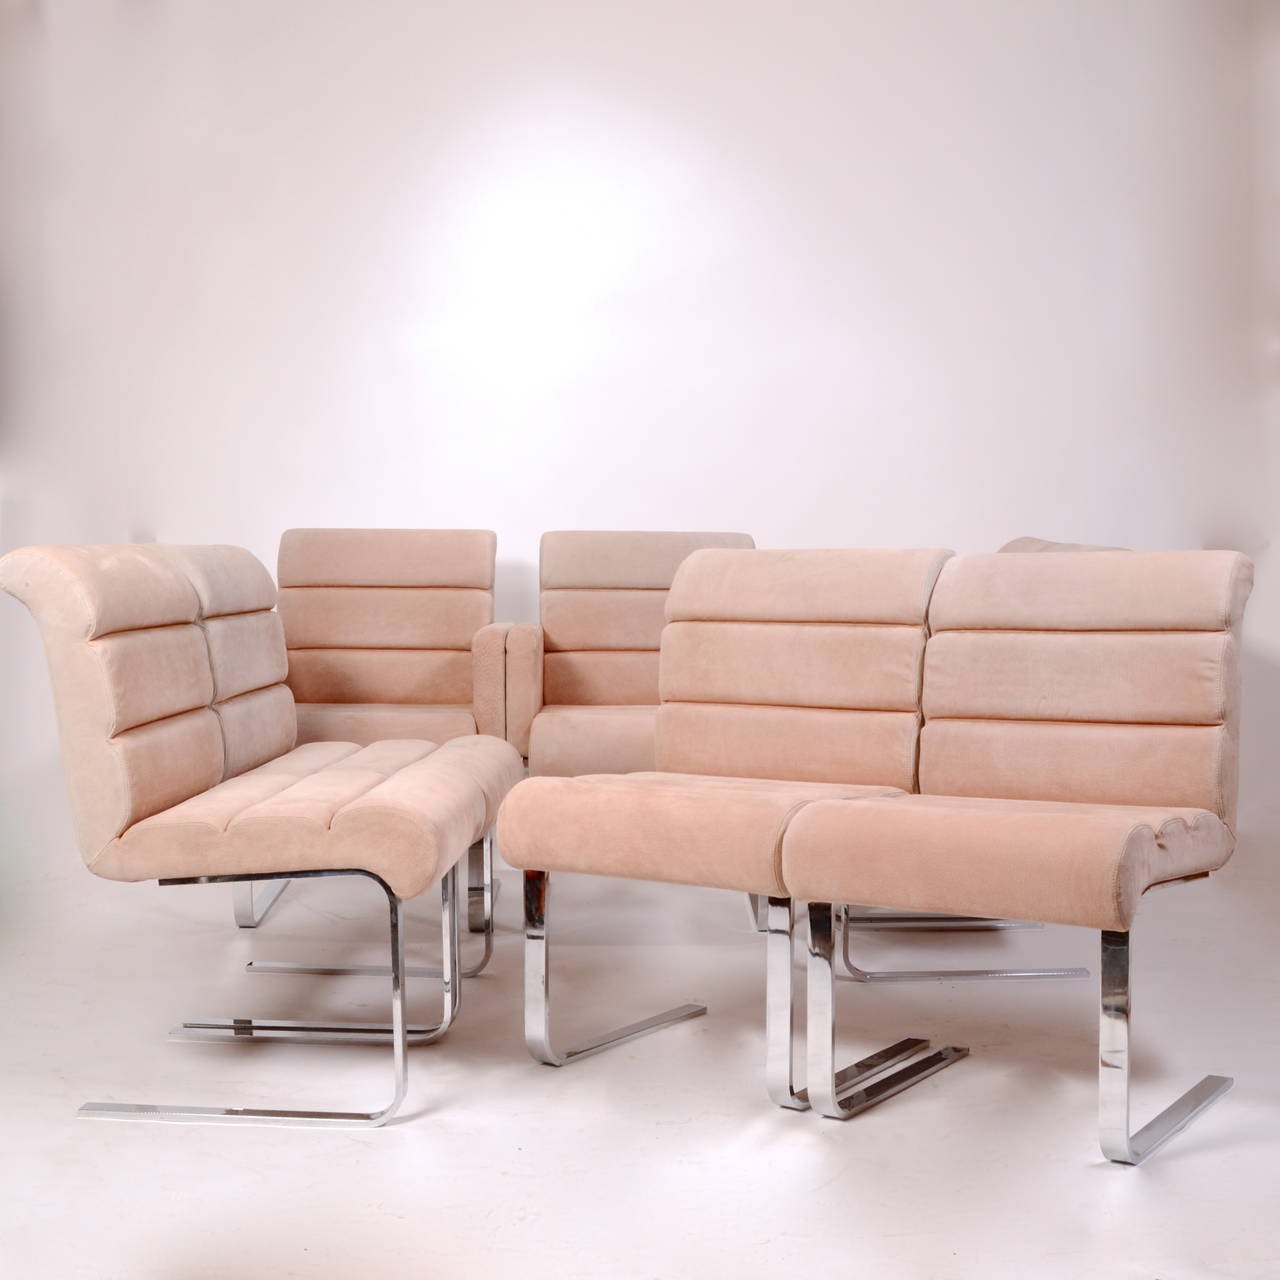 Set of 8 Lugano cantilever dining chairs, made in Italy by Mariani for Pace Collection, circa 1970s. Polished chrome steel and original suede upholstery.